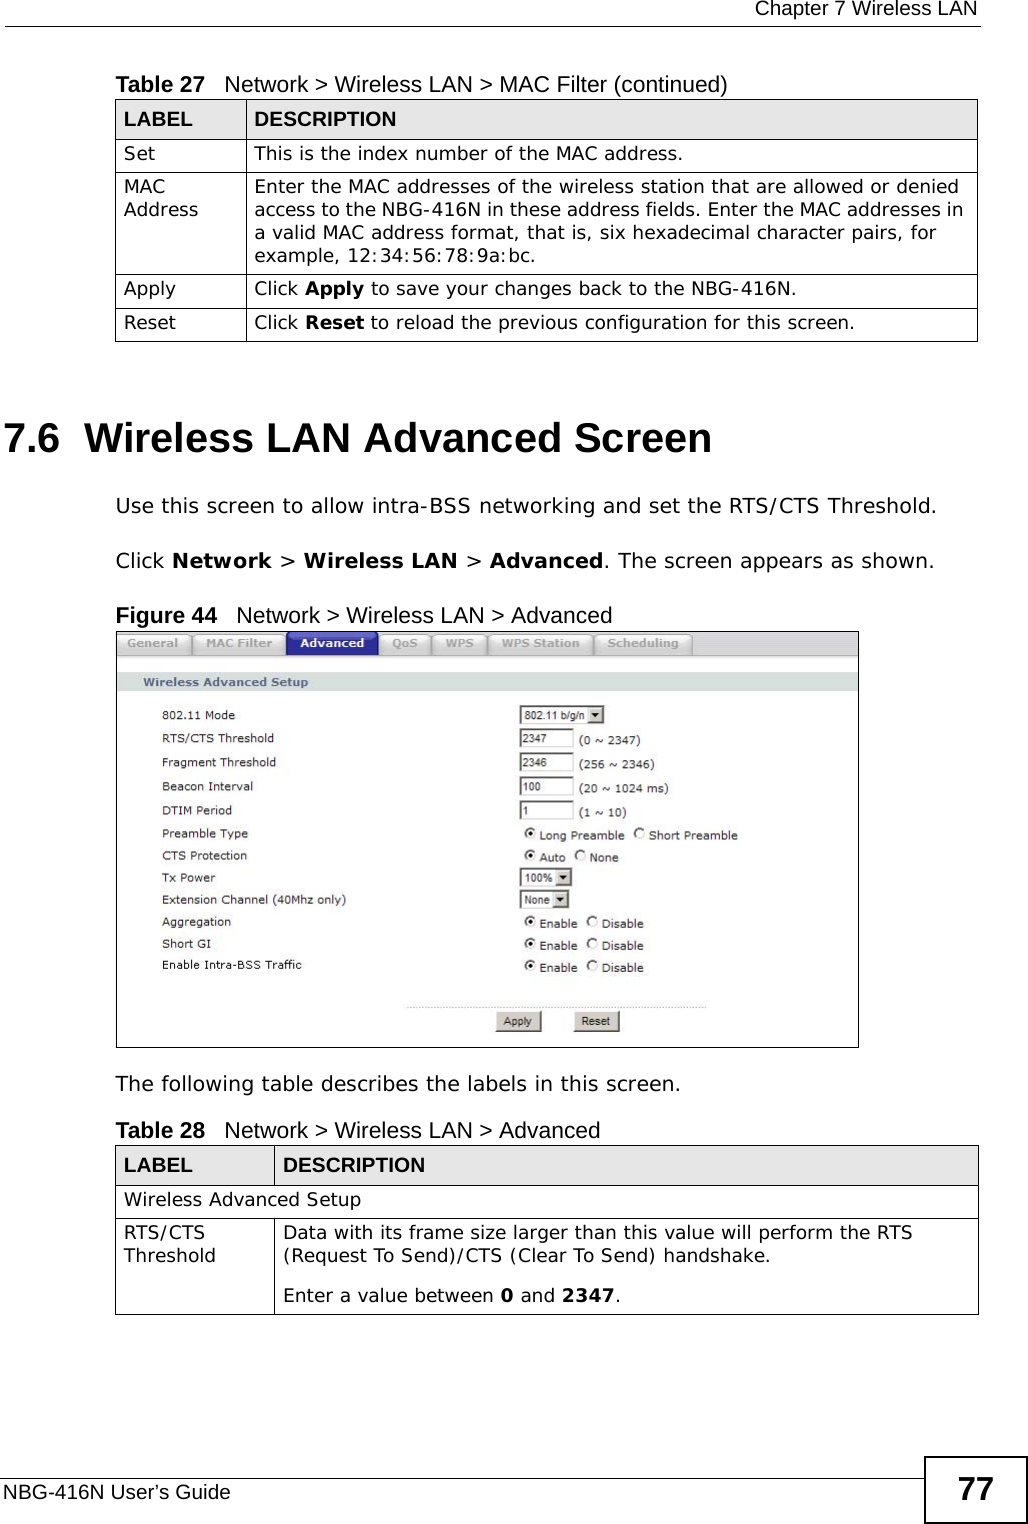  Chapter 7 Wireless LANNBG-416N User’s Guide 777.6  Wireless LAN Advanced ScreenUse this screen to allow intra-BSS networking and set the RTS/CTS Threshold.Click Network &gt; Wireless LAN &gt; Advanced. The screen appears as shown.Figure 44   Network &gt; Wireless LAN &gt; AdvancedThe following table describes the labels in this screen. Set This is the index number of the MAC address.MAC Address Enter the MAC addresses of the wireless station that are allowed or denied access to the NBG-416N in these address fields. Enter the MAC addresses in a valid MAC address format, that is, six hexadecimal character pairs, for example, 12:34:56:78:9a:bc.Apply Click Apply to save your changes back to the NBG-416N.Reset Click Reset to reload the previous configuration for this screen.Table 27   Network &gt; Wireless LAN &gt; MAC Filter (continued)LABEL DESCRIPTIONTable 28   Network &gt; Wireless LAN &gt; AdvancedLABEL DESCRIPTIONWireless Advanced SetupRTS/CTS Threshold Data with its frame size larger than this value will perform the RTS (Request To Send)/CTS (Clear To Send) handshake. Enter a value between 0 and 2347. 